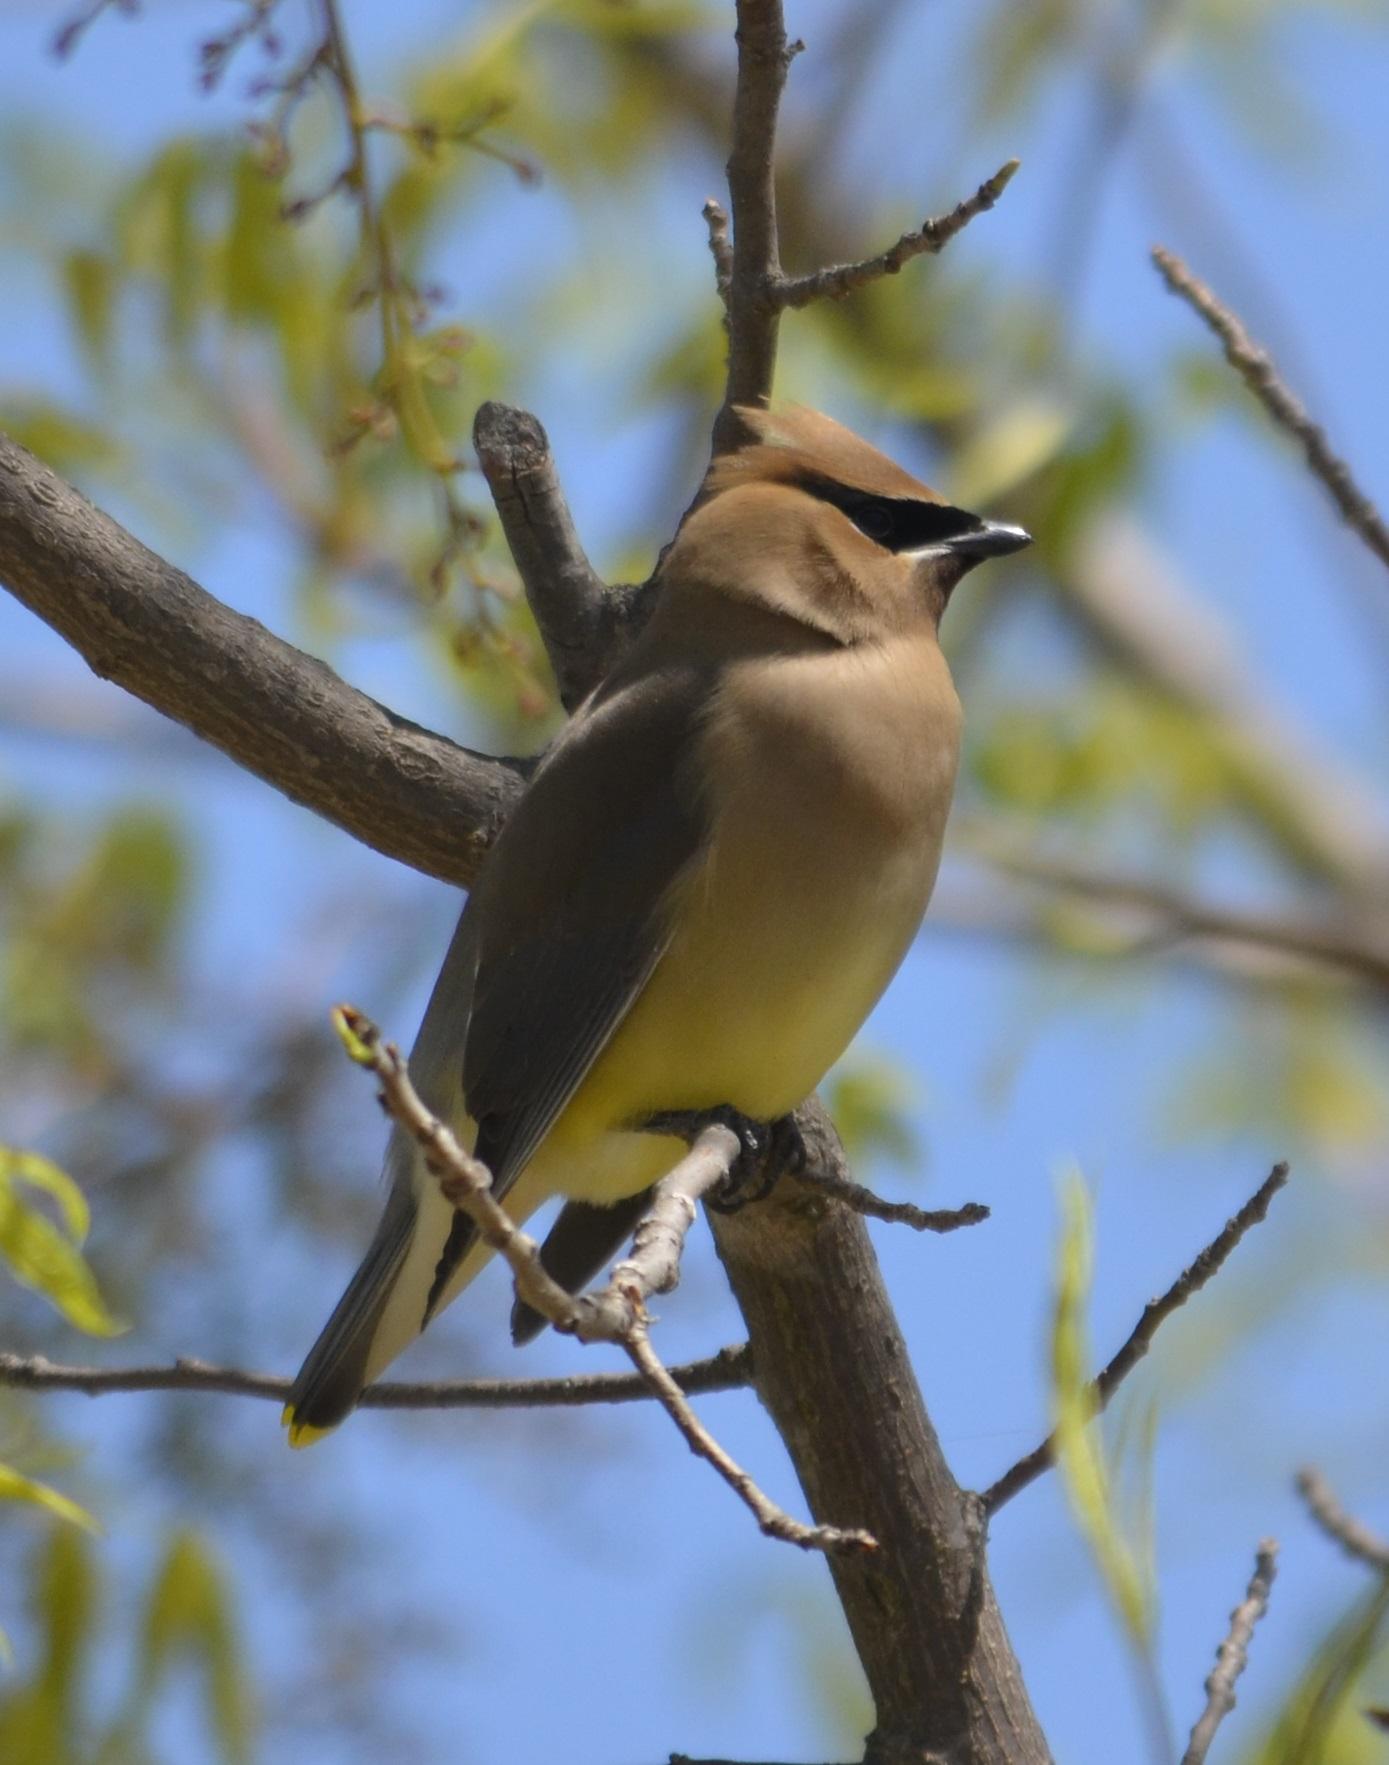 Cole took this picture of a Cedar Waxwing in his yard in Texas. He used a Nikon D5 100 with 55-300mm zoom lens.